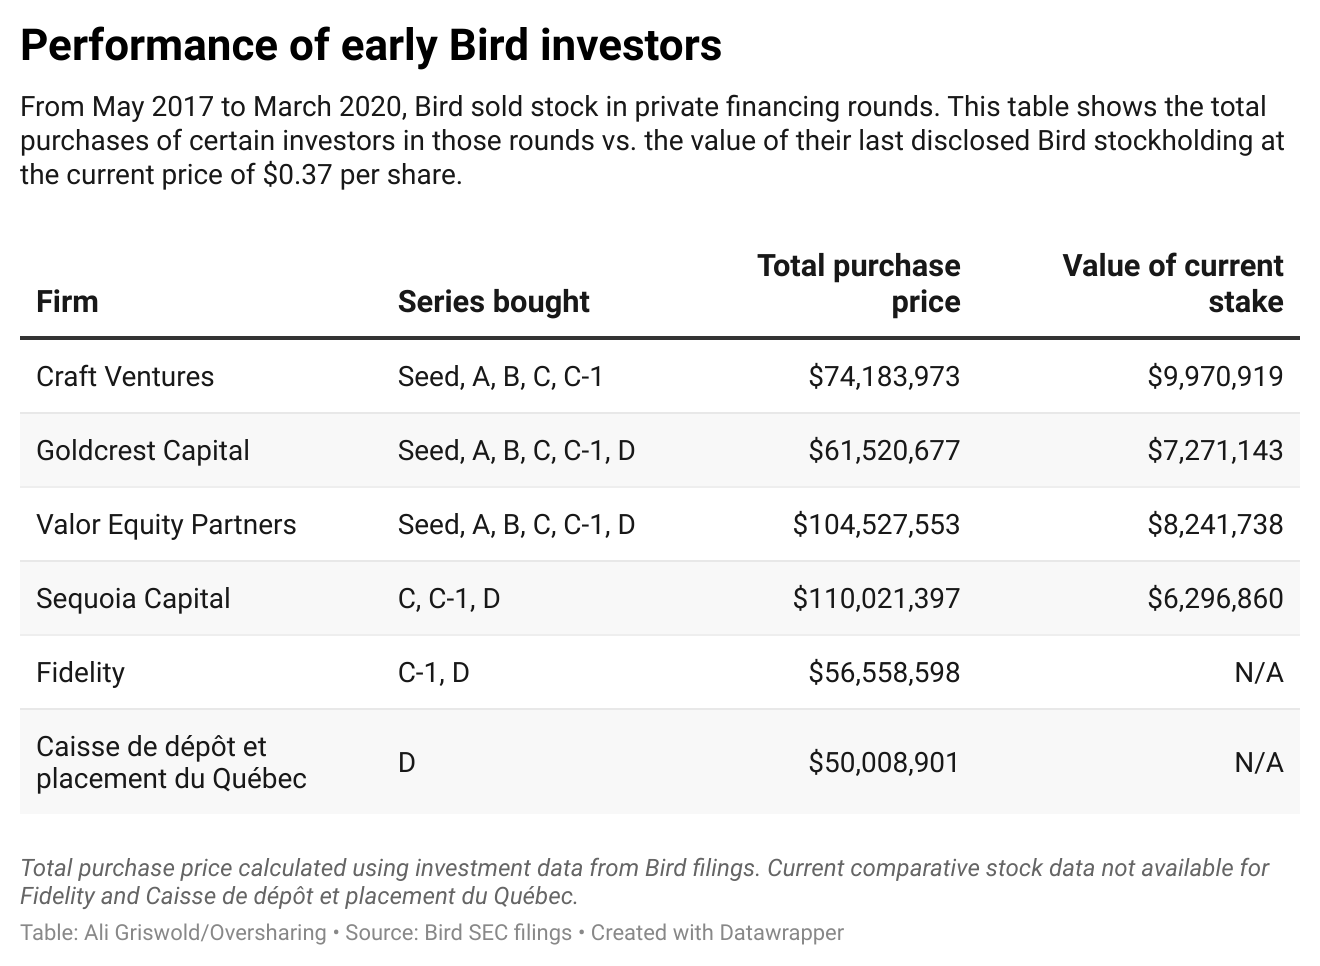 Chart showing the performance of early Bird investors